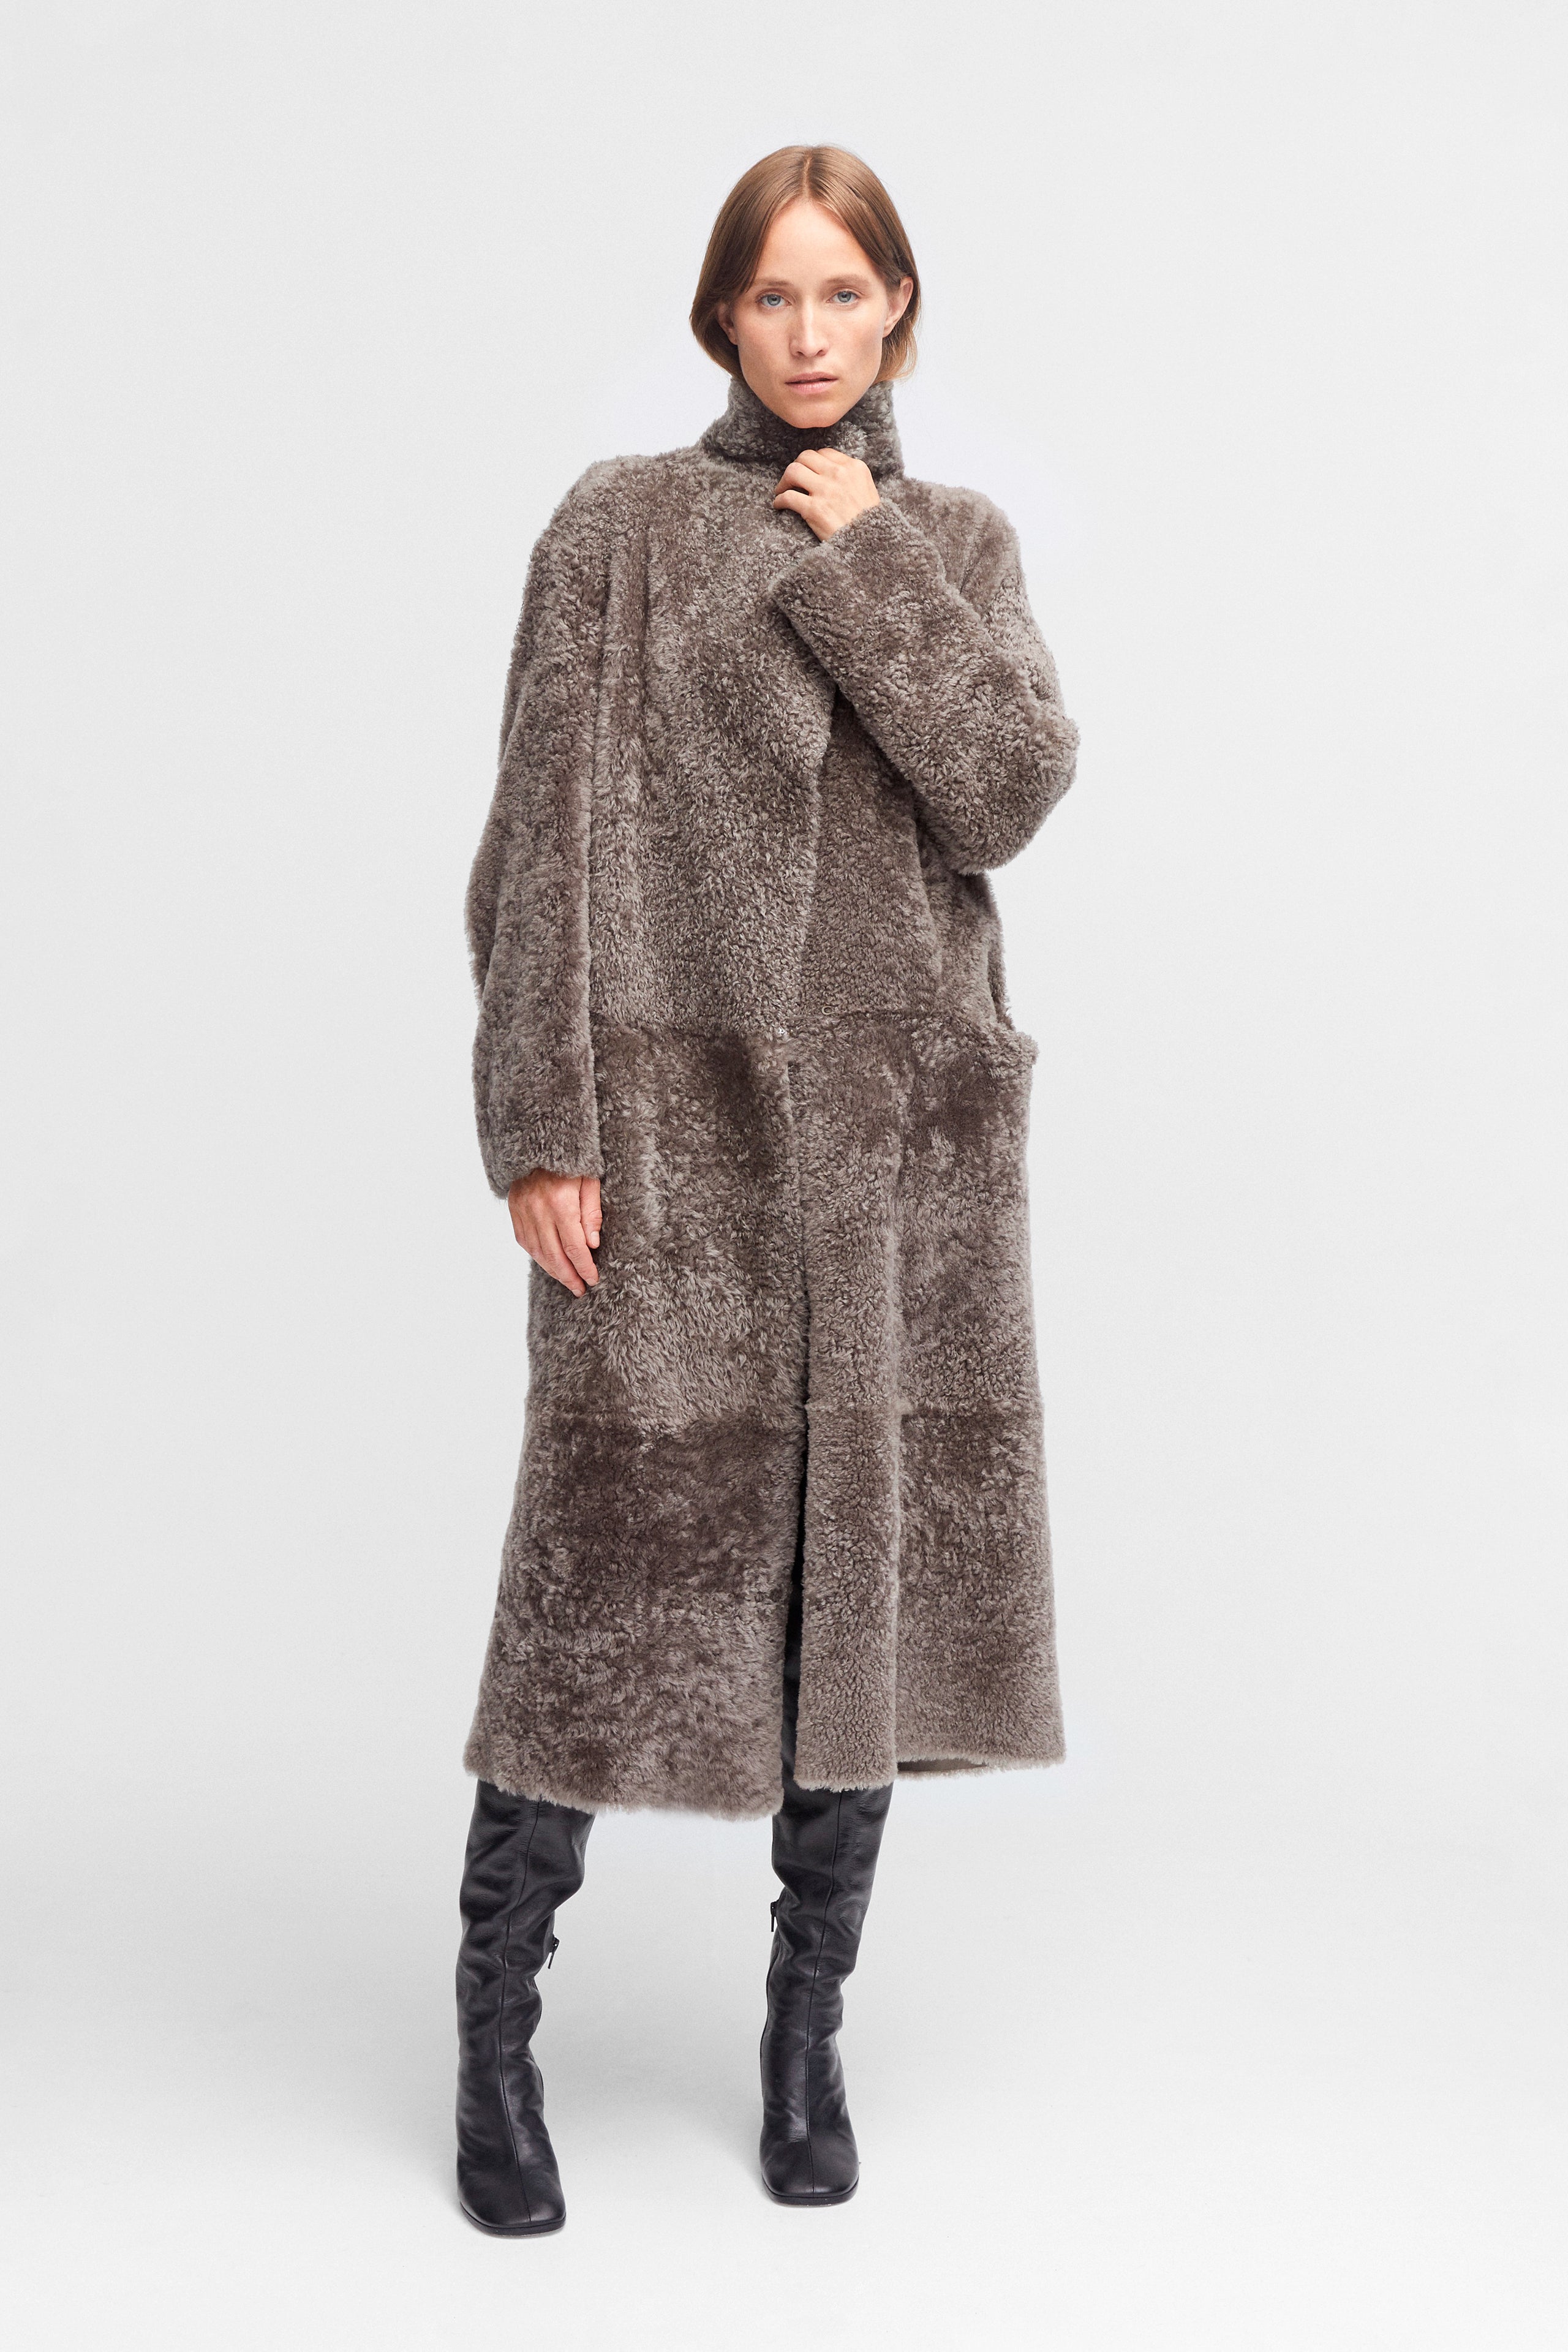 Model is wearing the Birthday Coat Iceland Grey Draped Shearling Coat Front